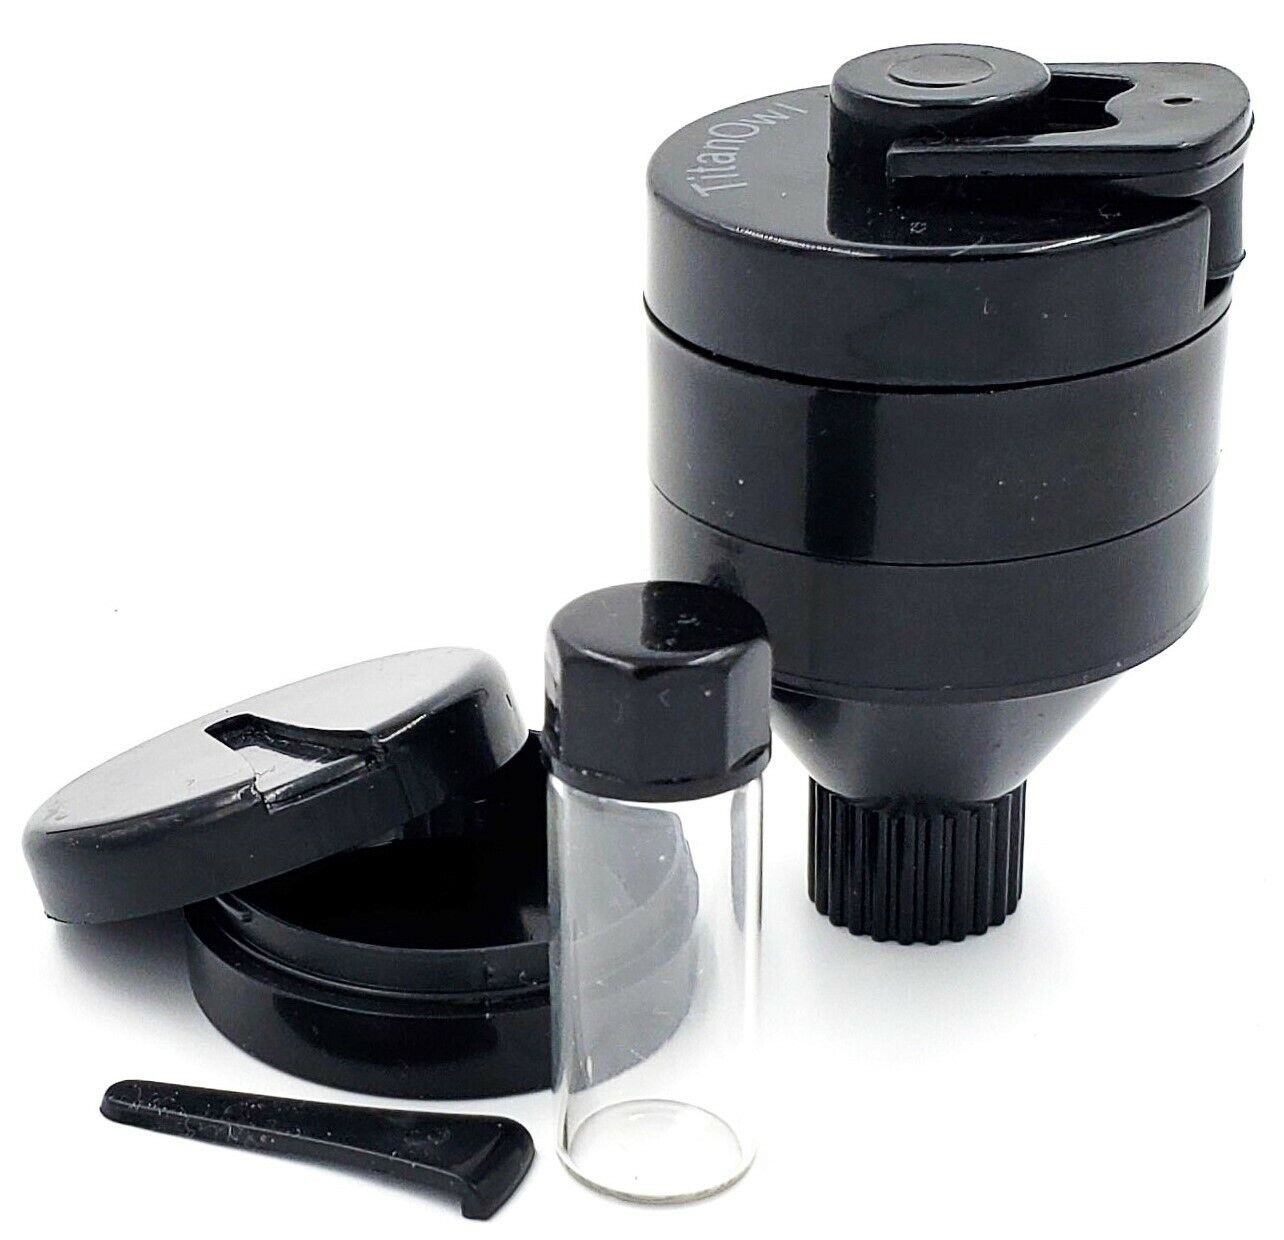 Plastic Spice Funnel Crank Grinder Hand Mill Dia 1.6 inch Portable w/ Glass Vial